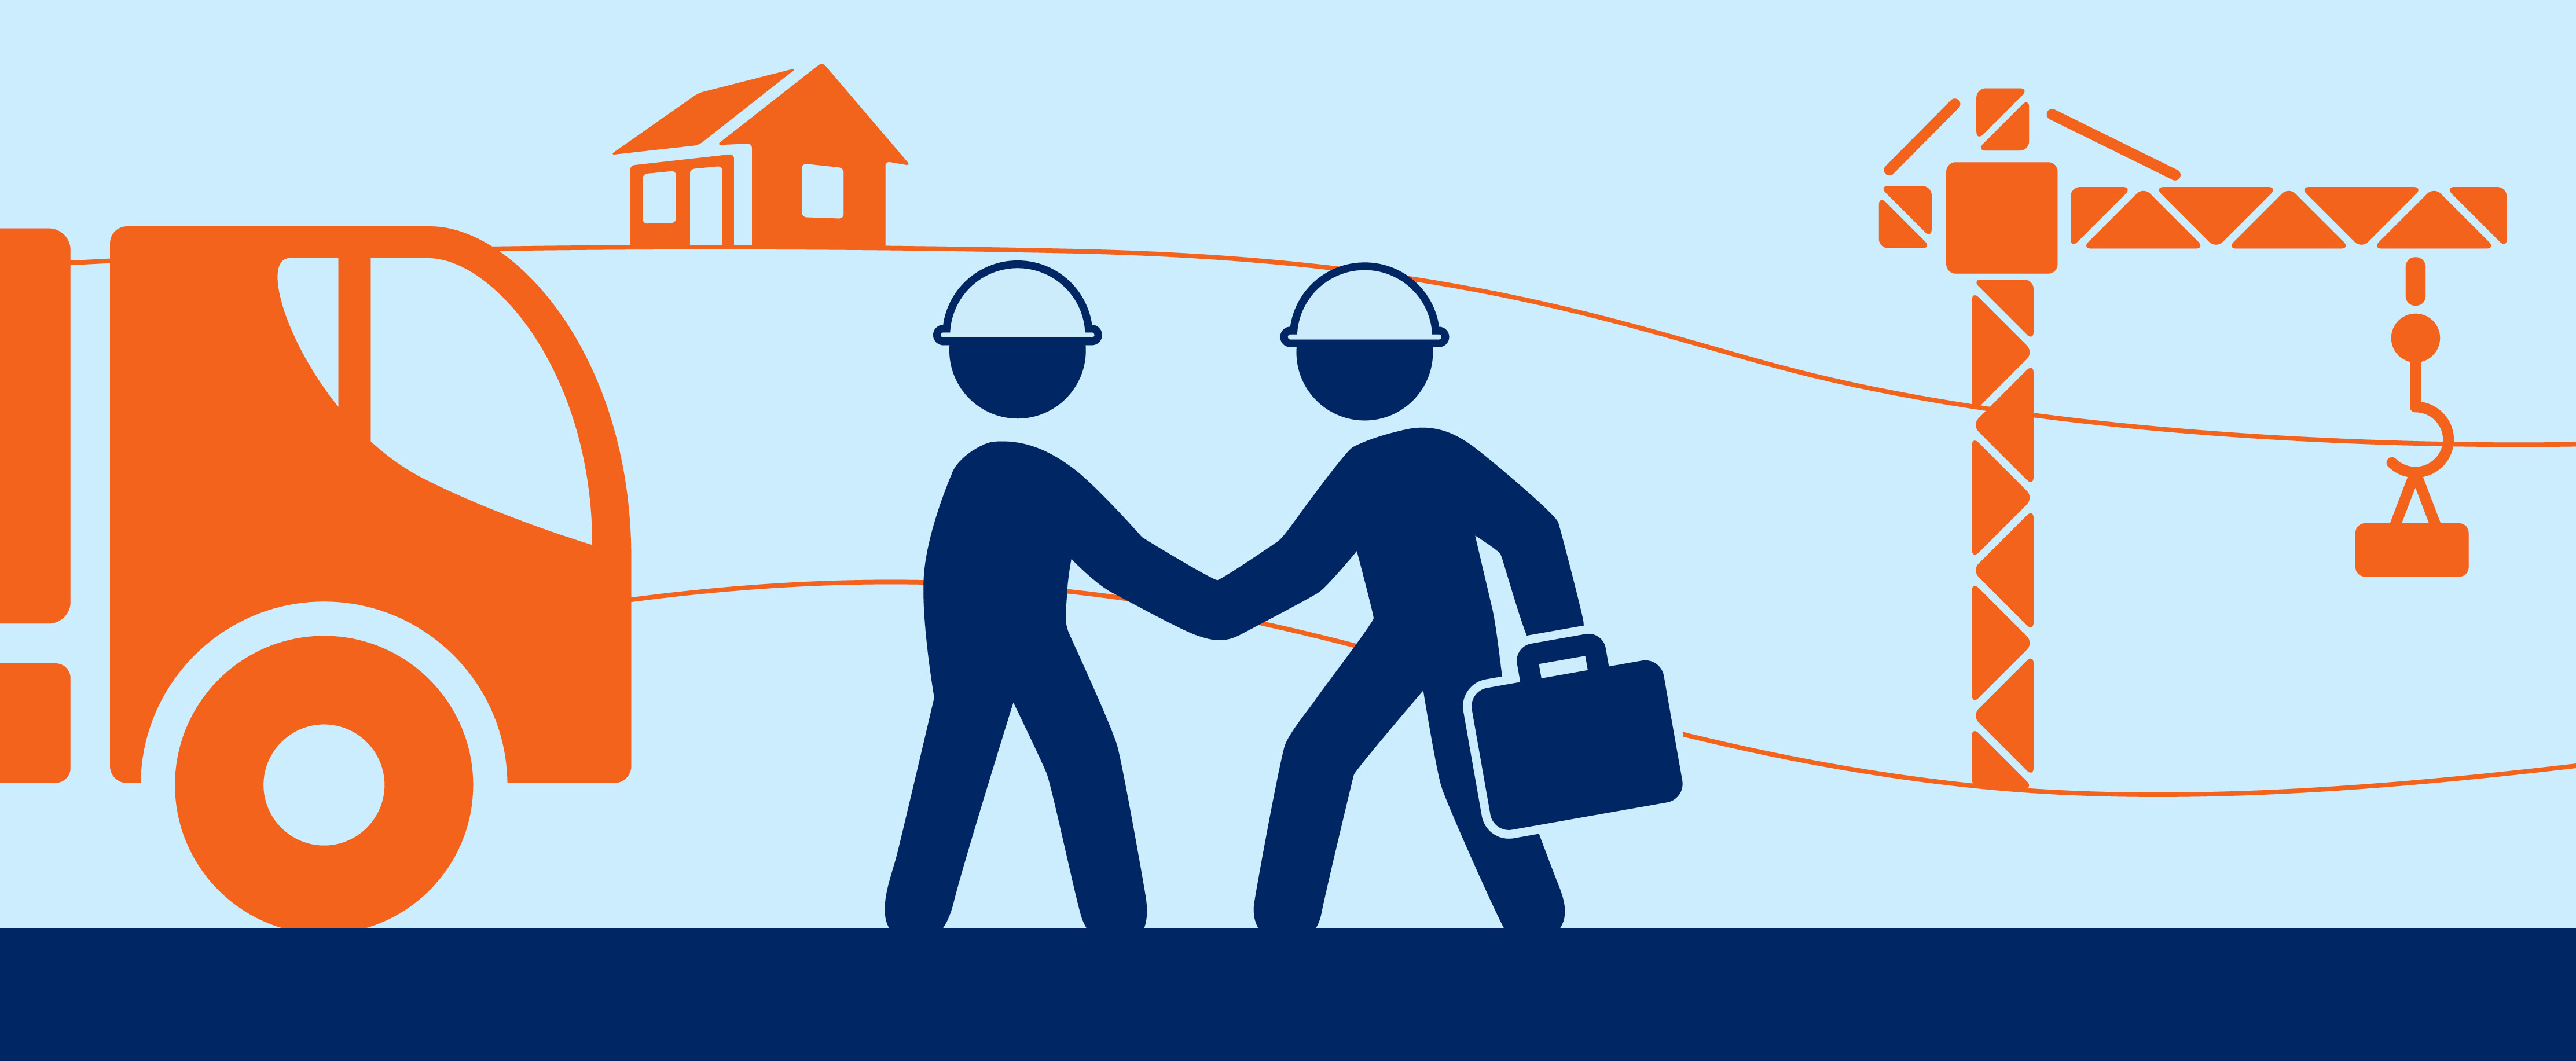 A stick figure graphic of two workers, next to a track, a crane and a house. The workers are shaking hands and wearing hard hats.